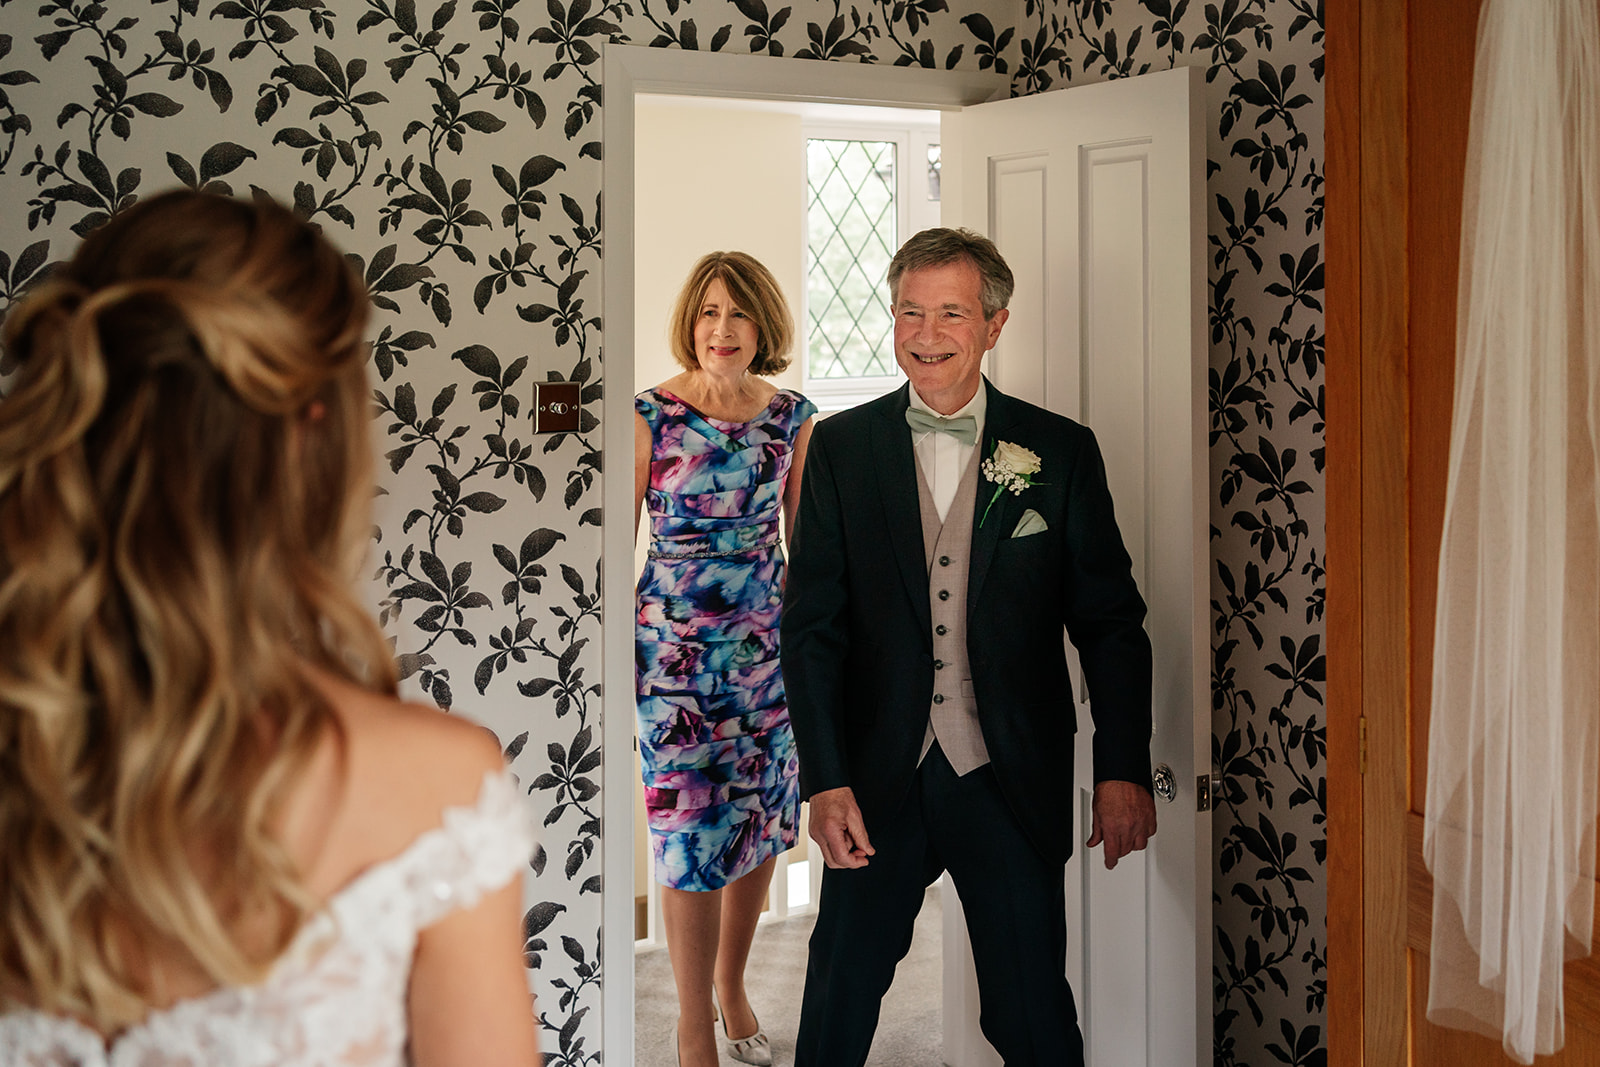 Mum and dad seeing their daughter in her wedding dress for the first time 